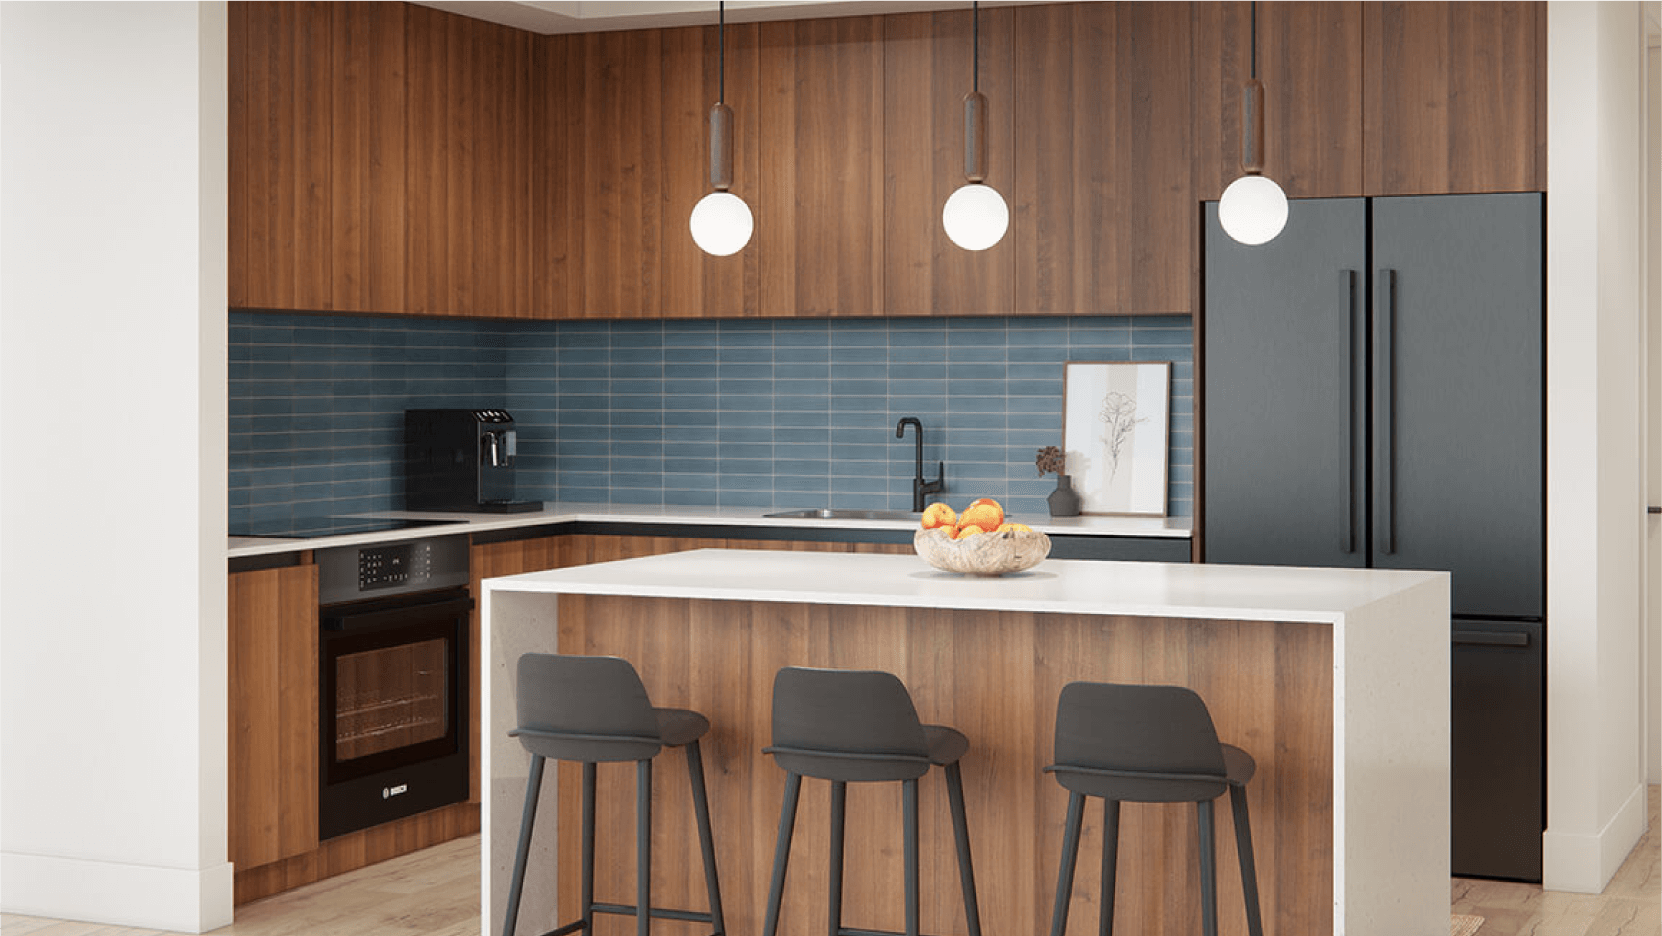 Modern kitchen area in a condo at Vesper ATX in Downtown Austin featuring warm wooden cabinetry, a striking blue tile backsplash, and elegant white pendant lights above a white island countertop.